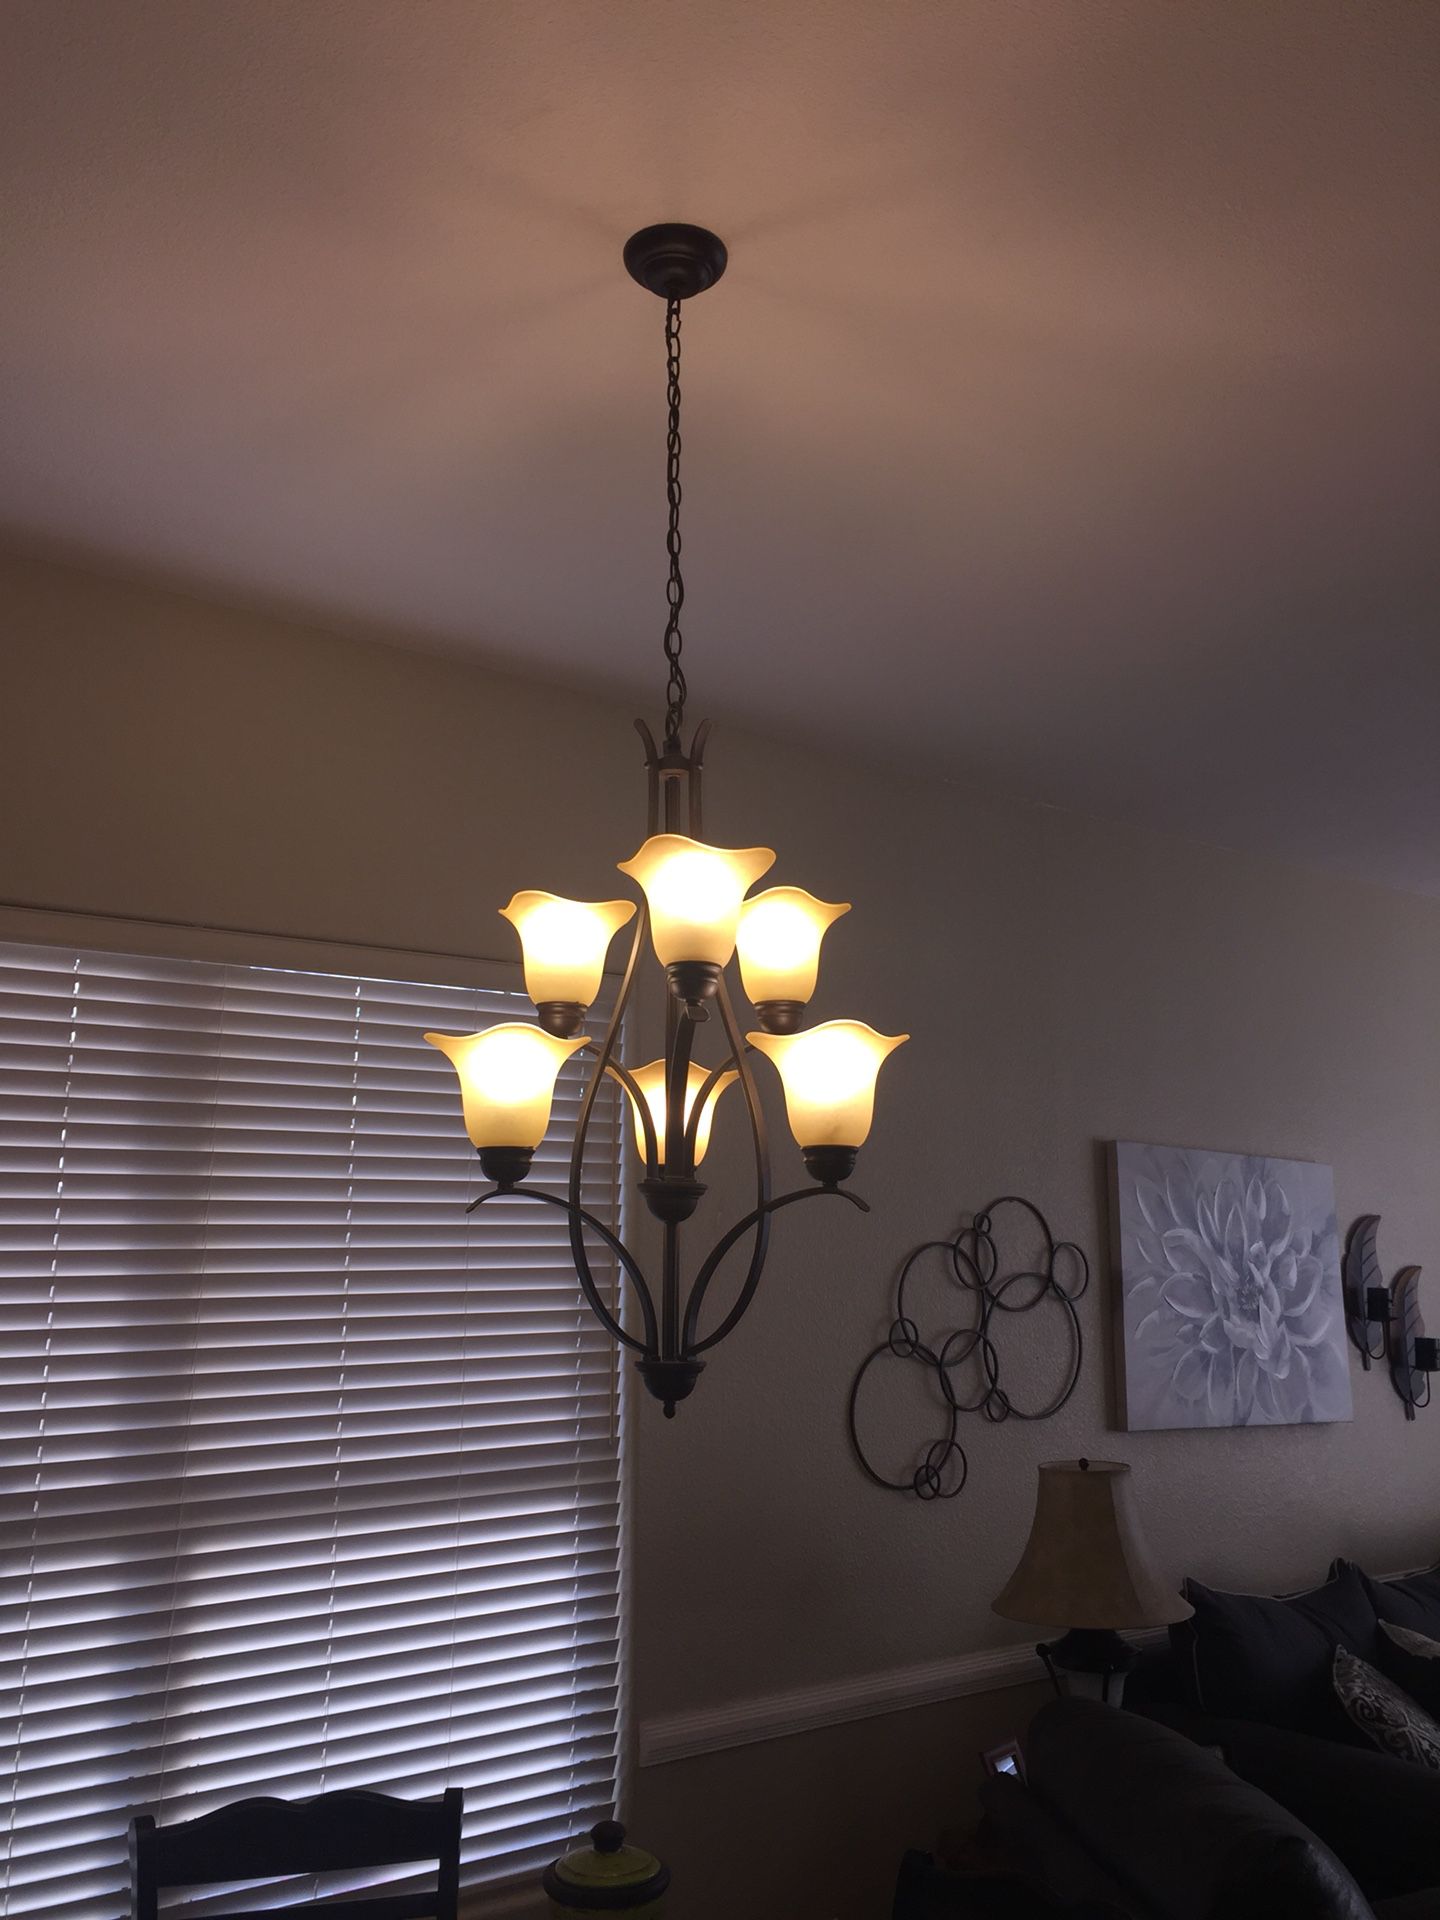 Chandelier with 6 lights !! Beautiful in great condition